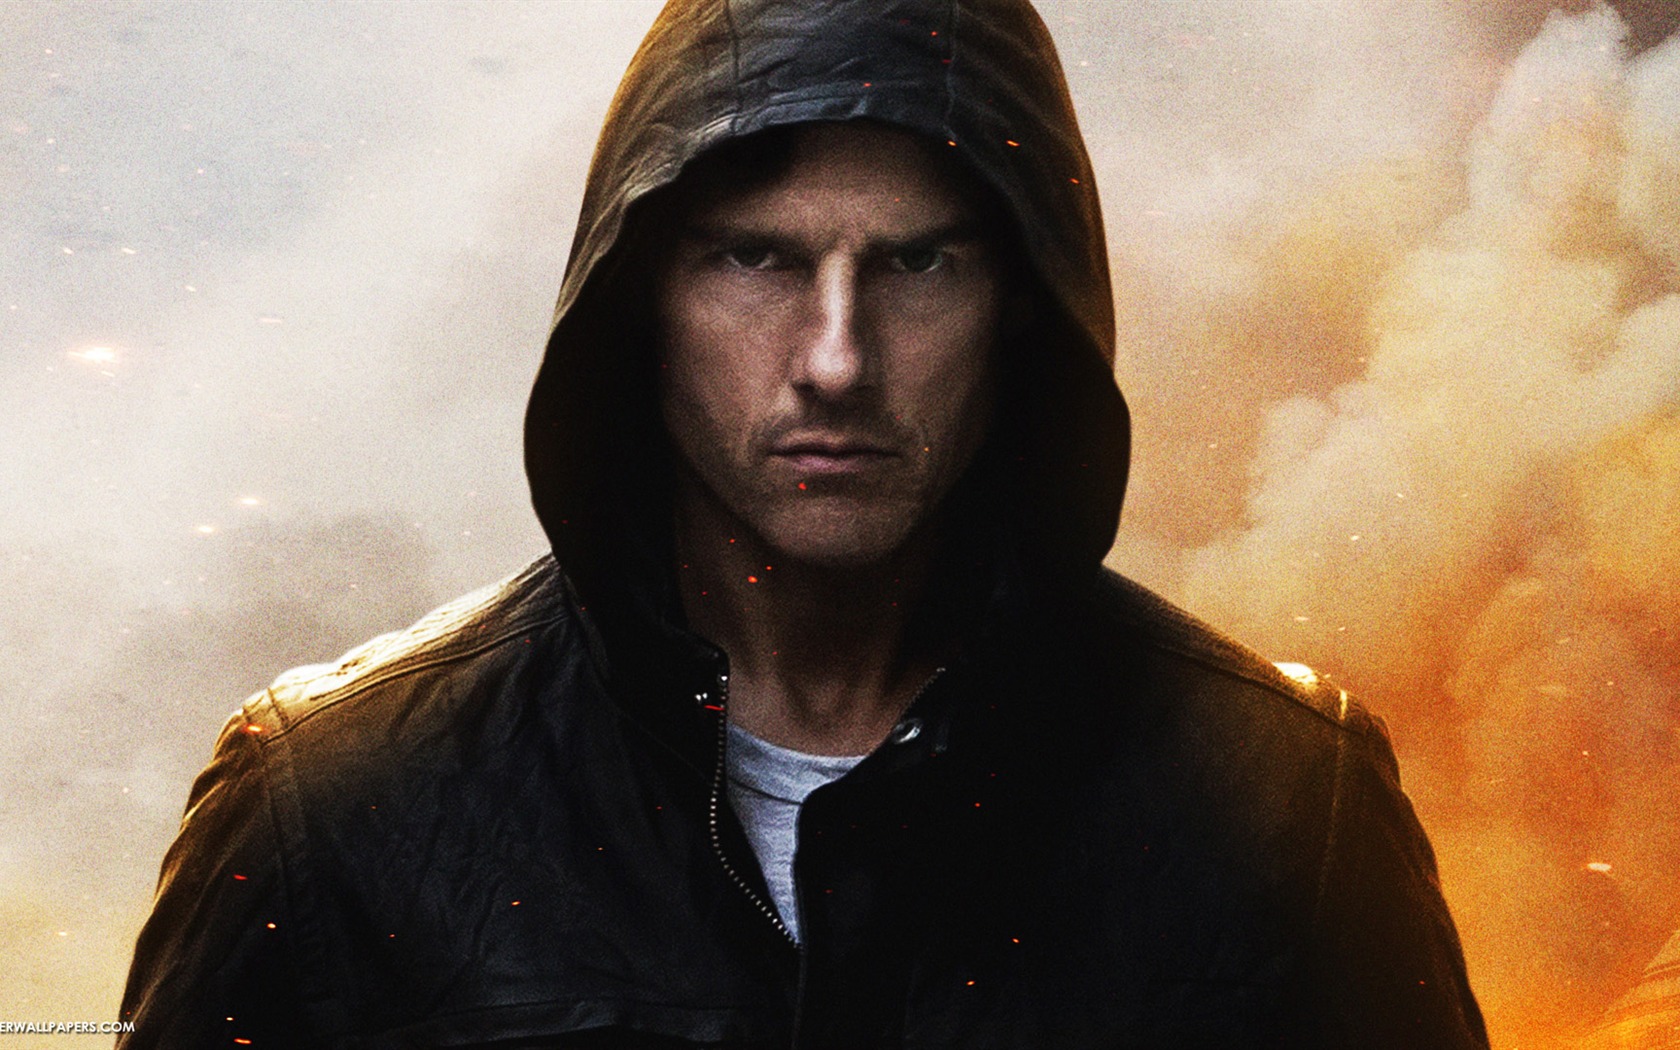 Mission: Impossible - Ghost Protocol 碟中谍4 高清壁纸3 - 1680x1050